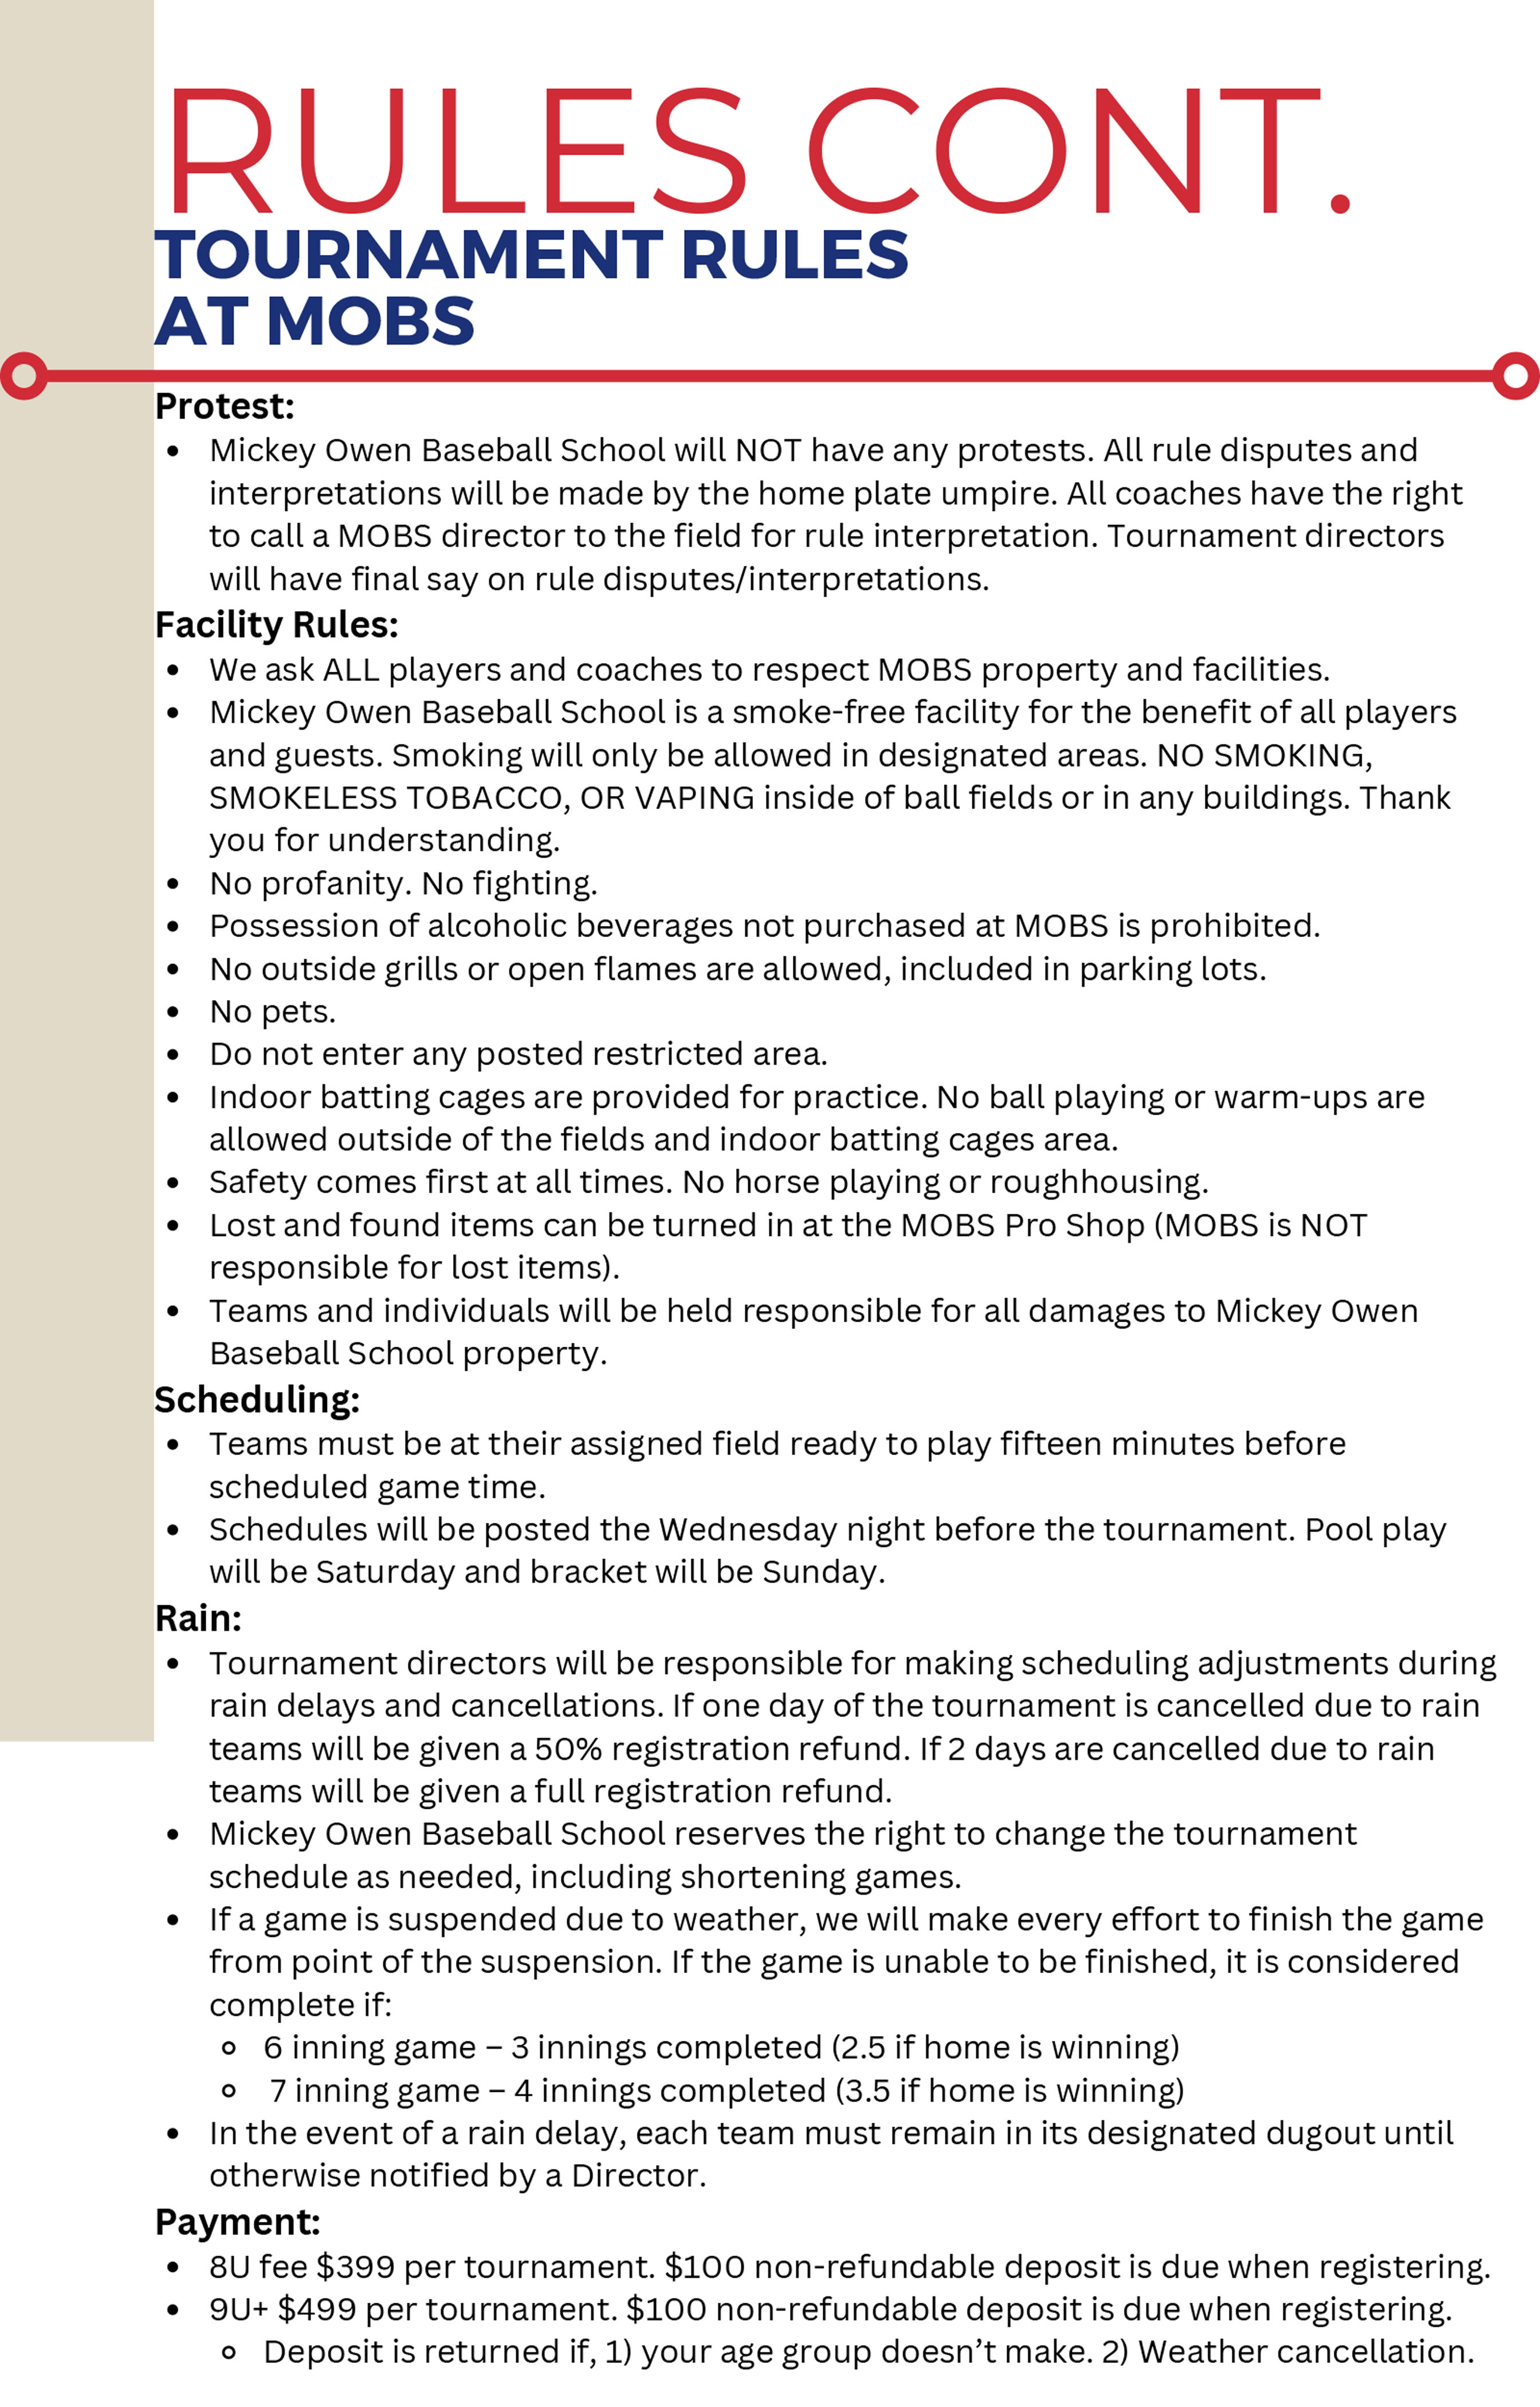 Mickey Owen Tournament Guide page 6.